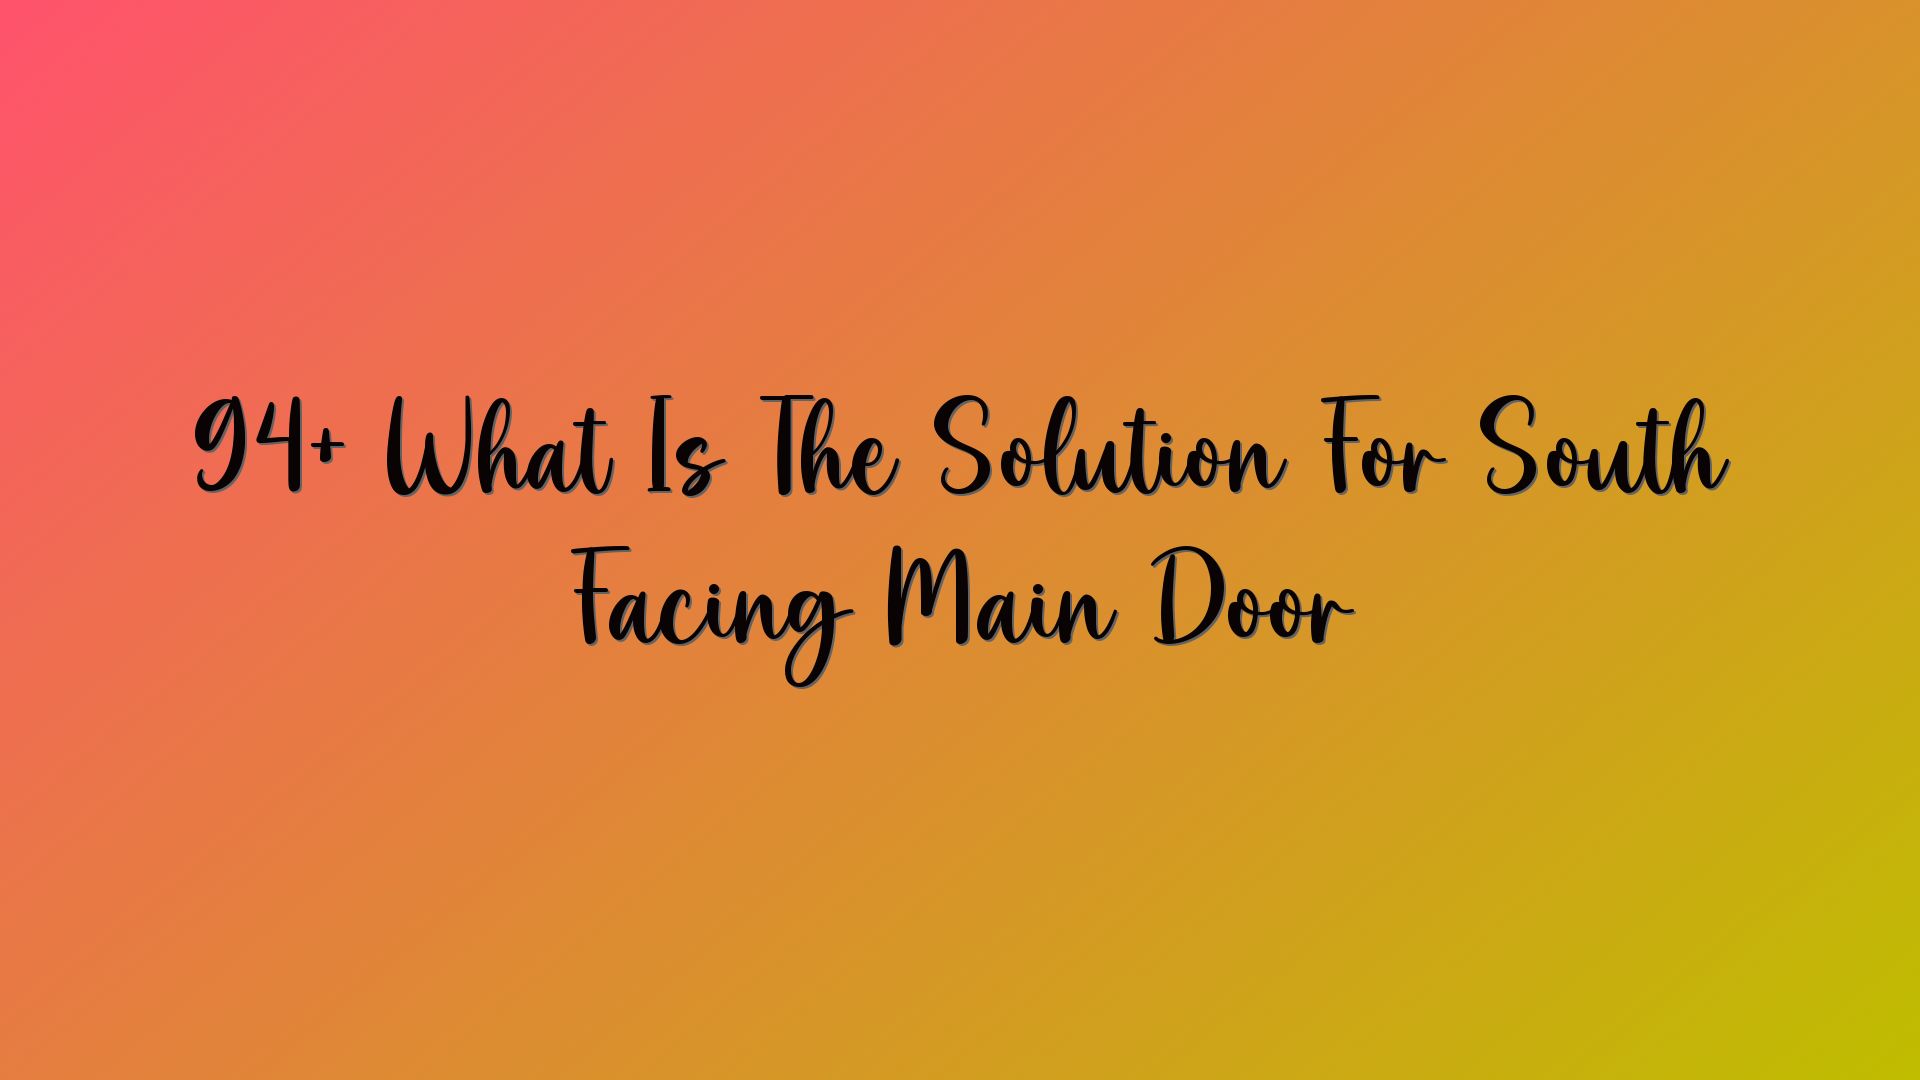 94+ What Is The Solution For South Facing Main Door